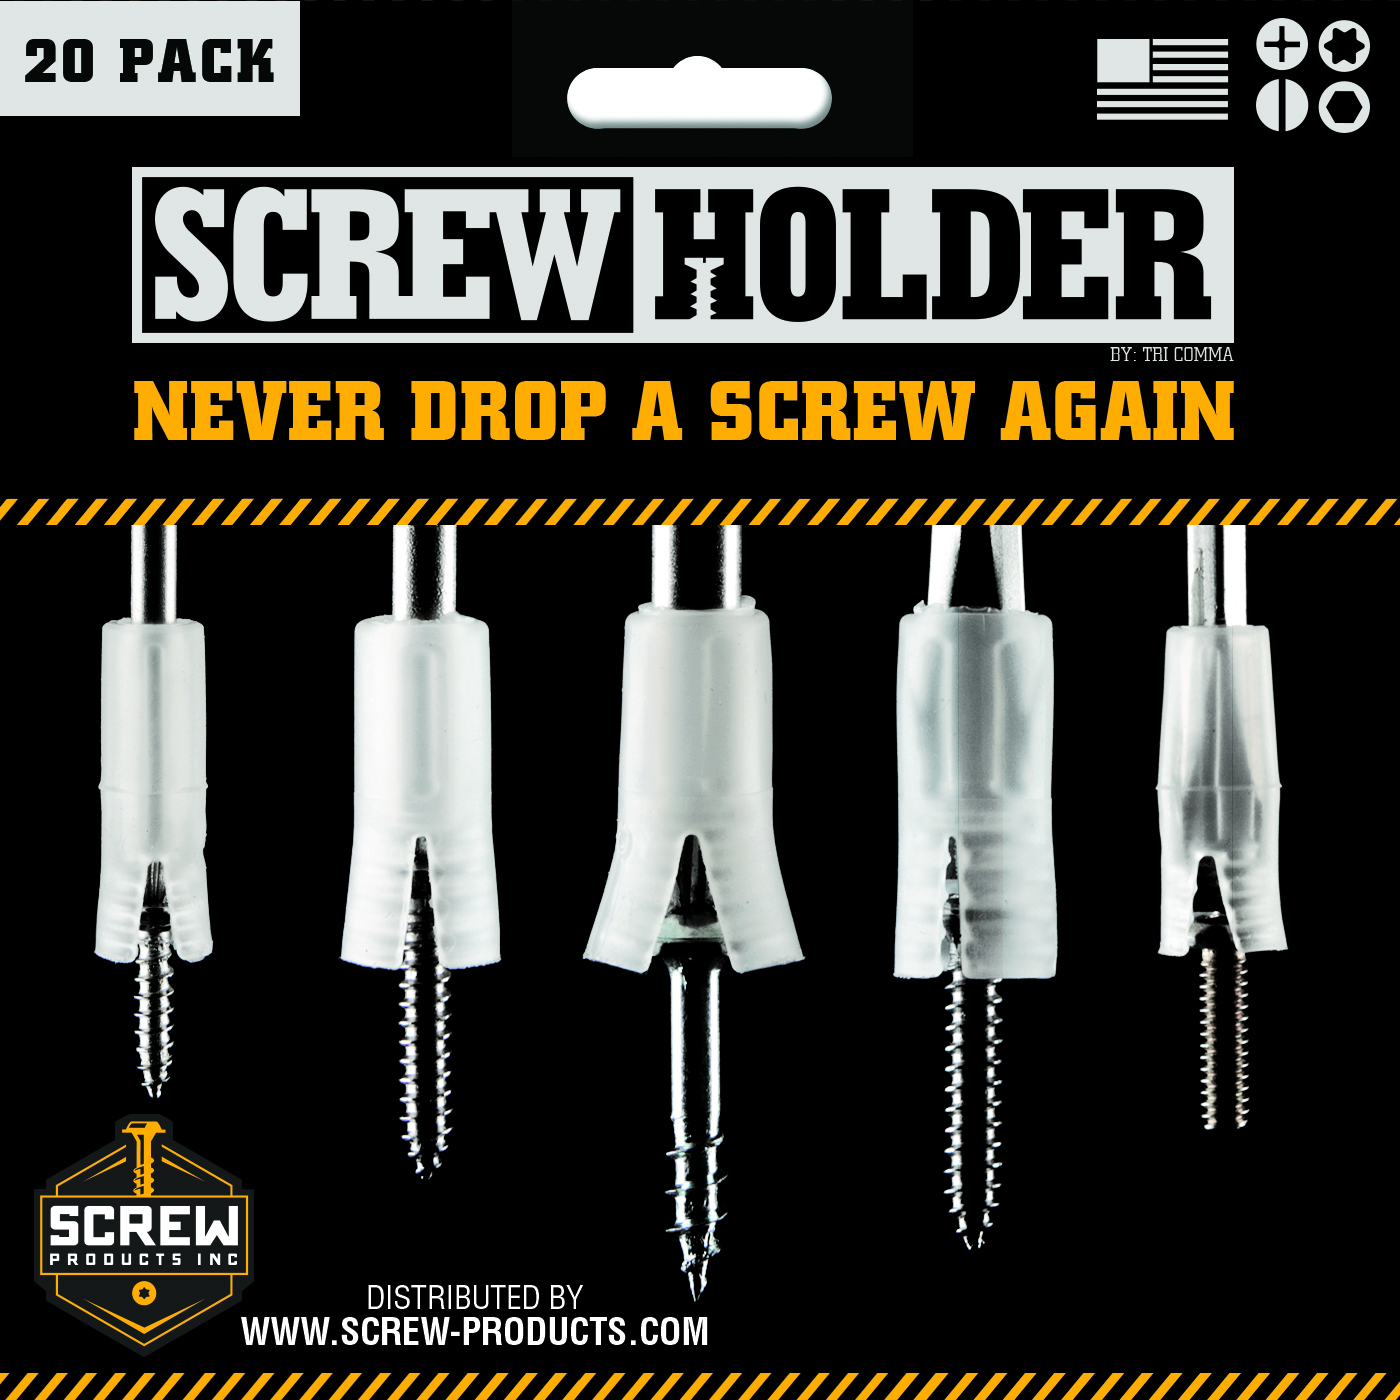 Product Introductions: Screw Holder